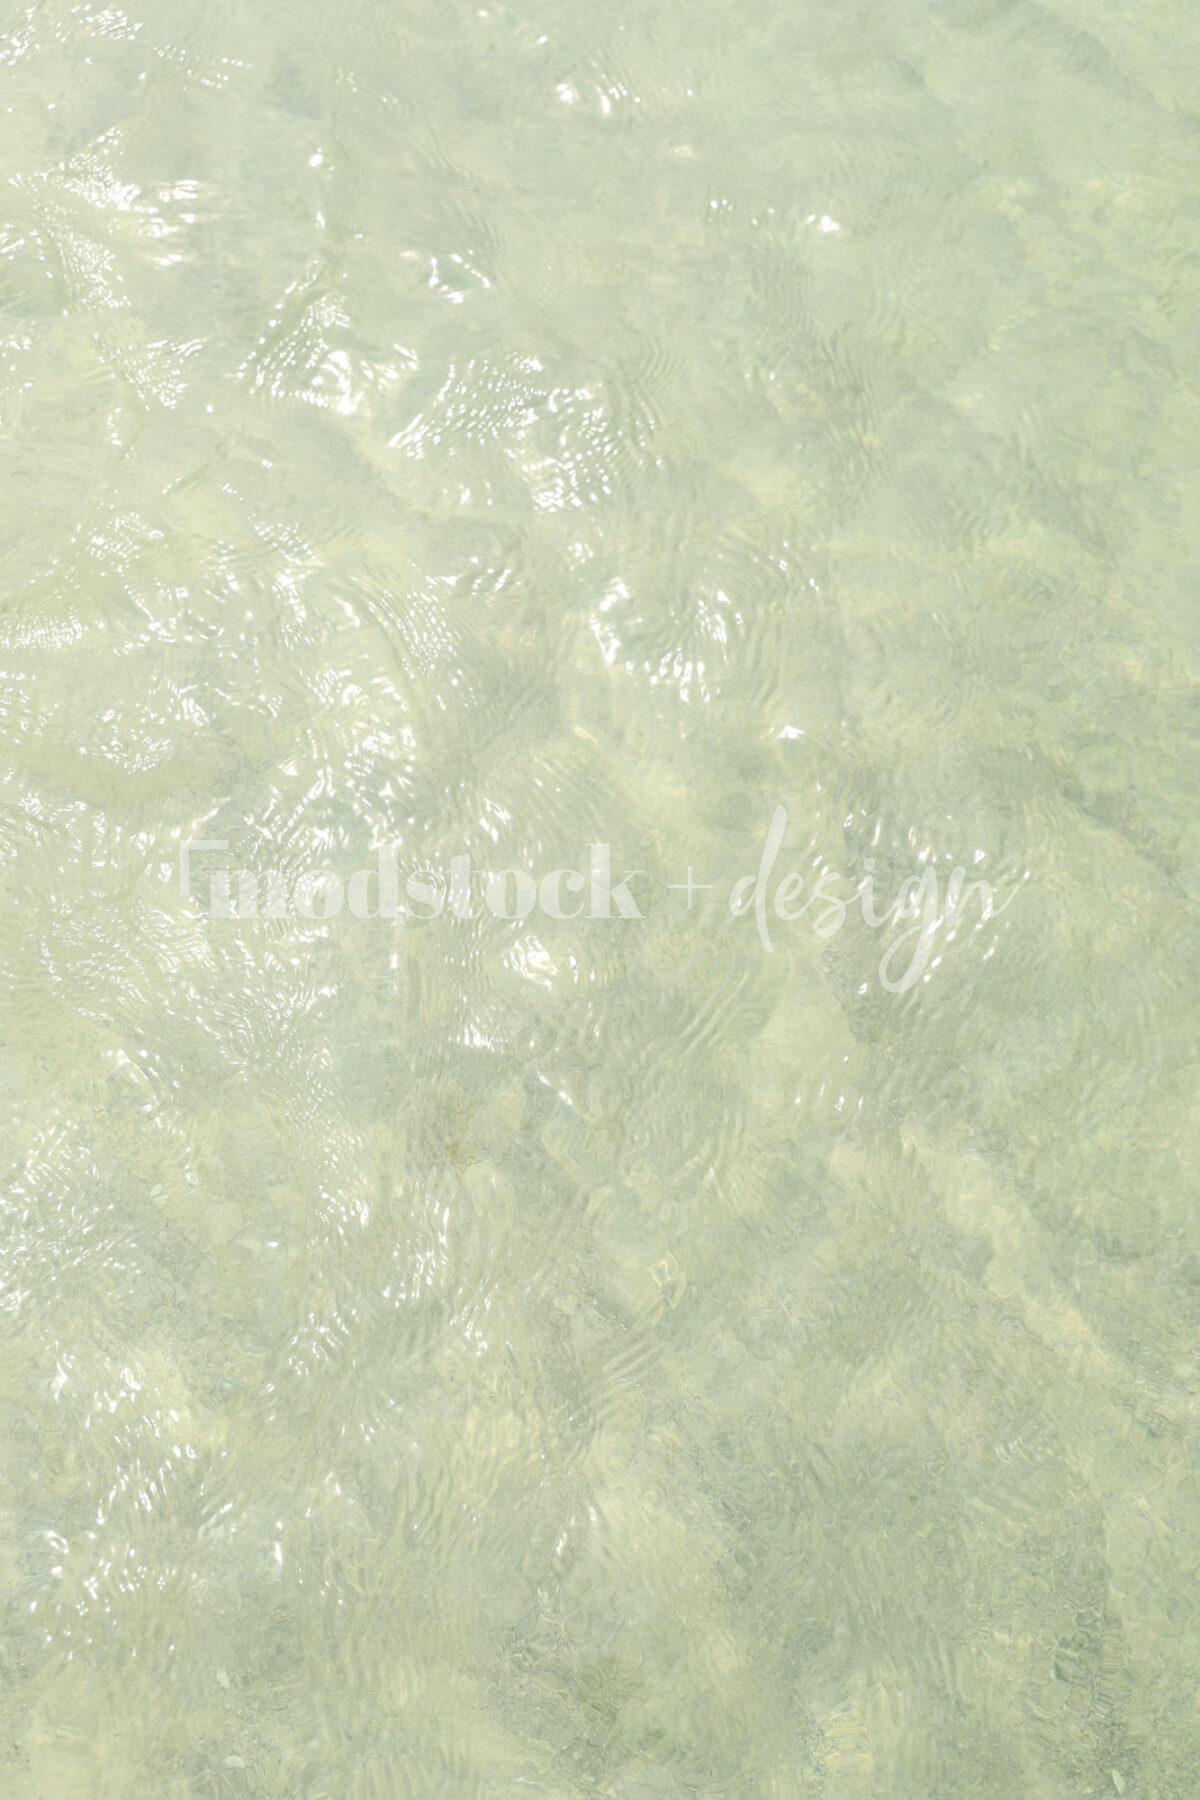 Water and Sand Textures 11